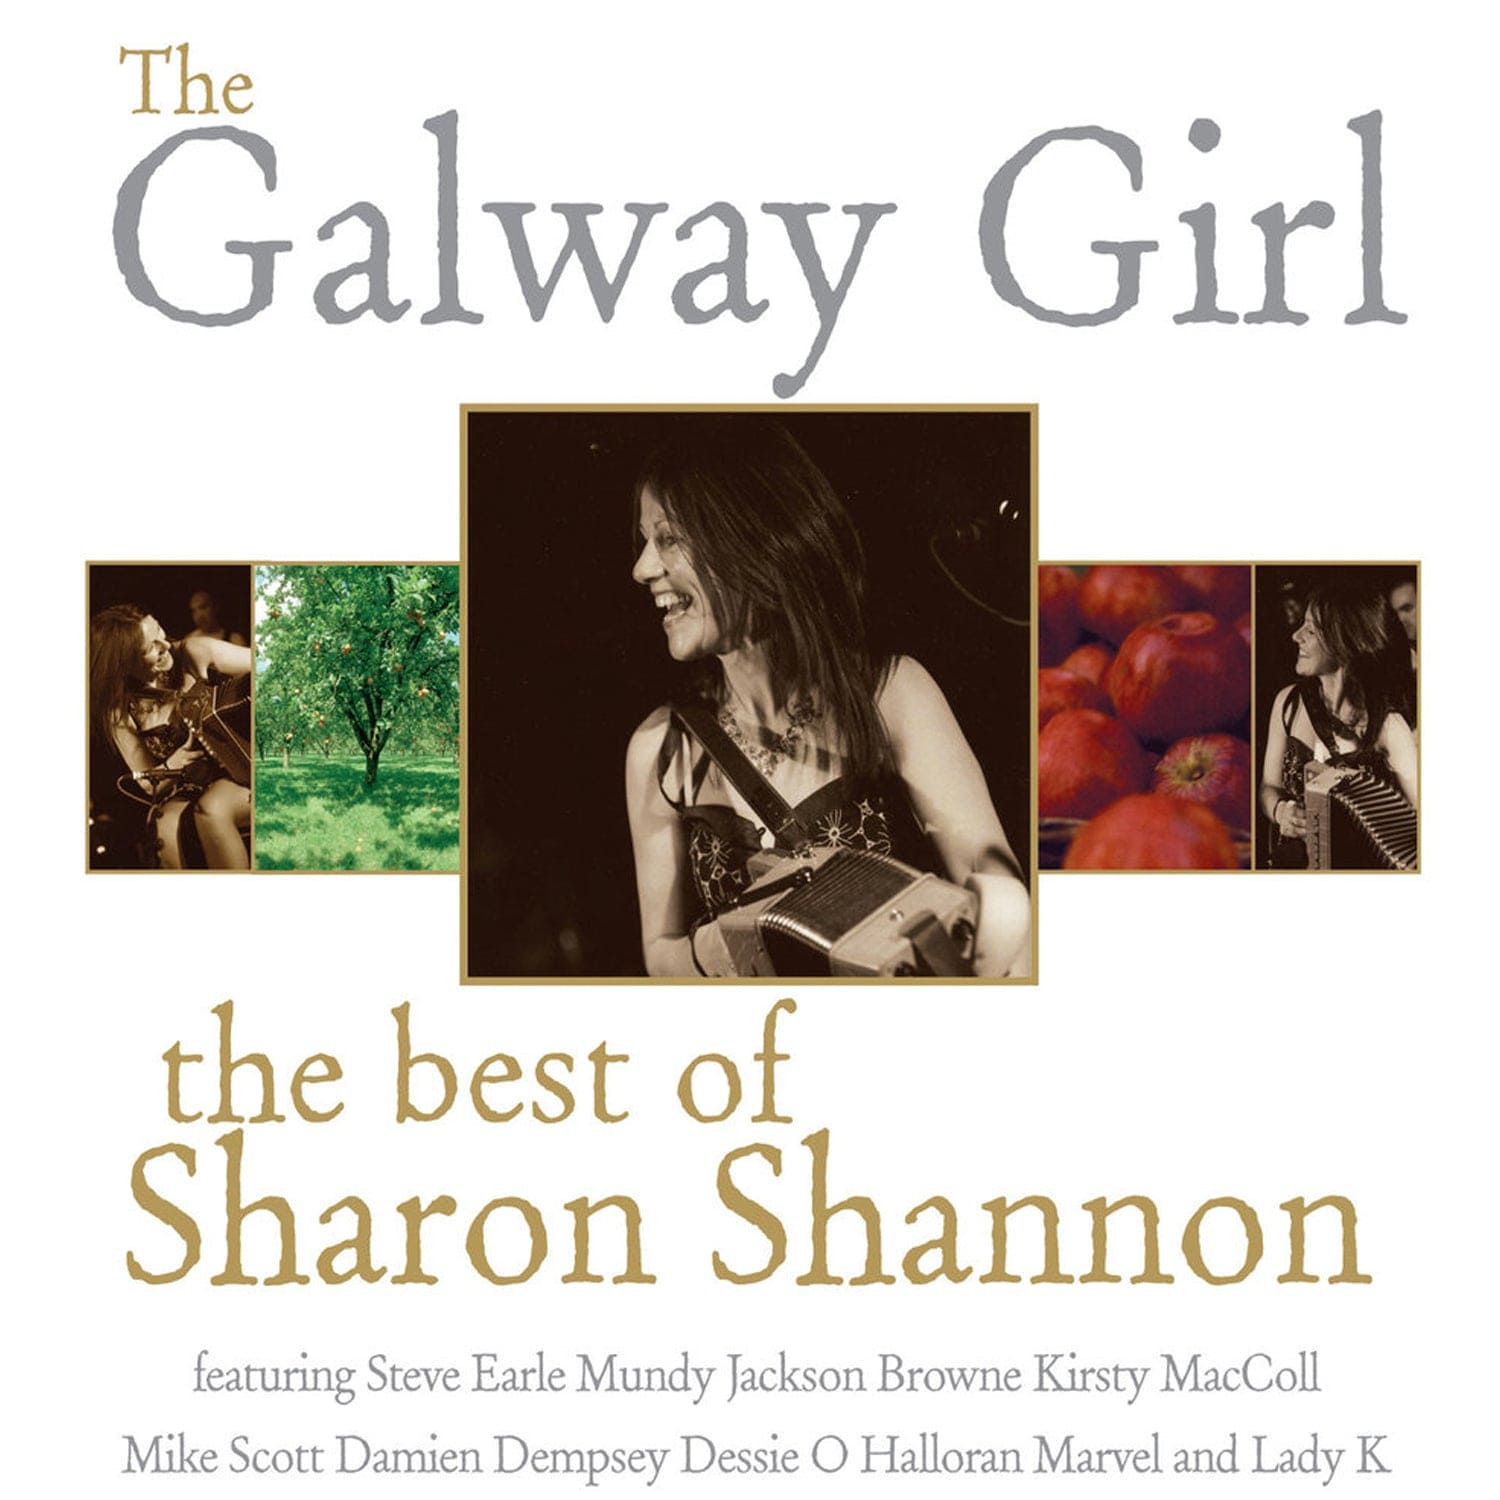 The Galway Girl - The Best of Sharon Shannon [CD]